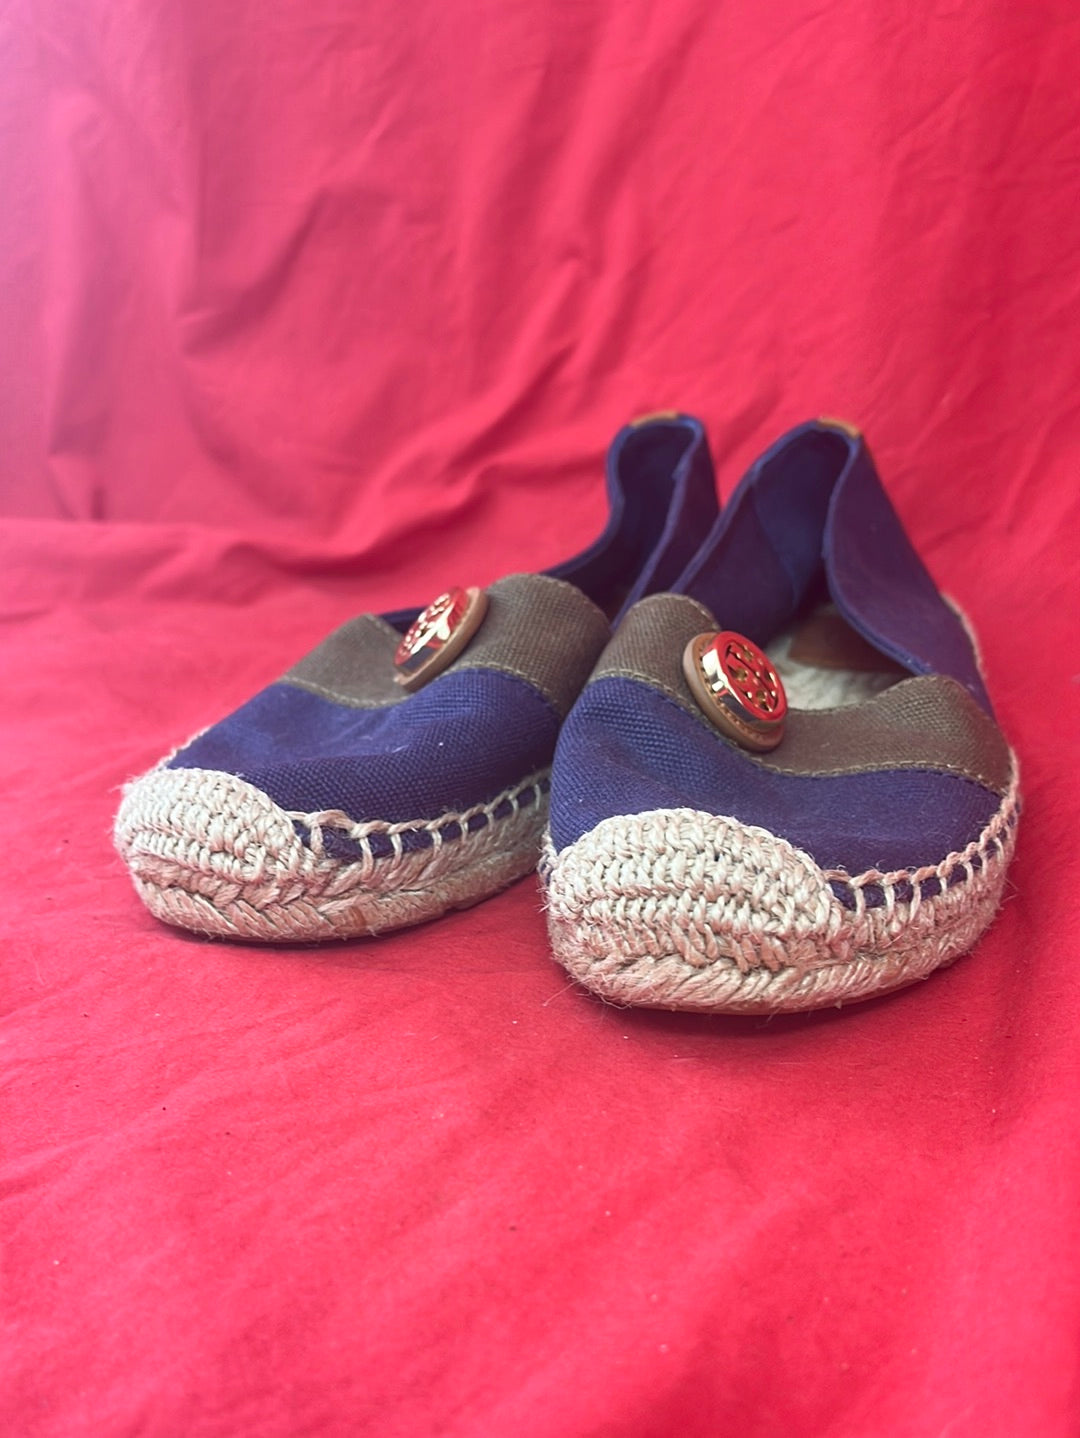 TORY BURCH Beacher Flat Espadrilles in Navy and Olive  -- Size 6M